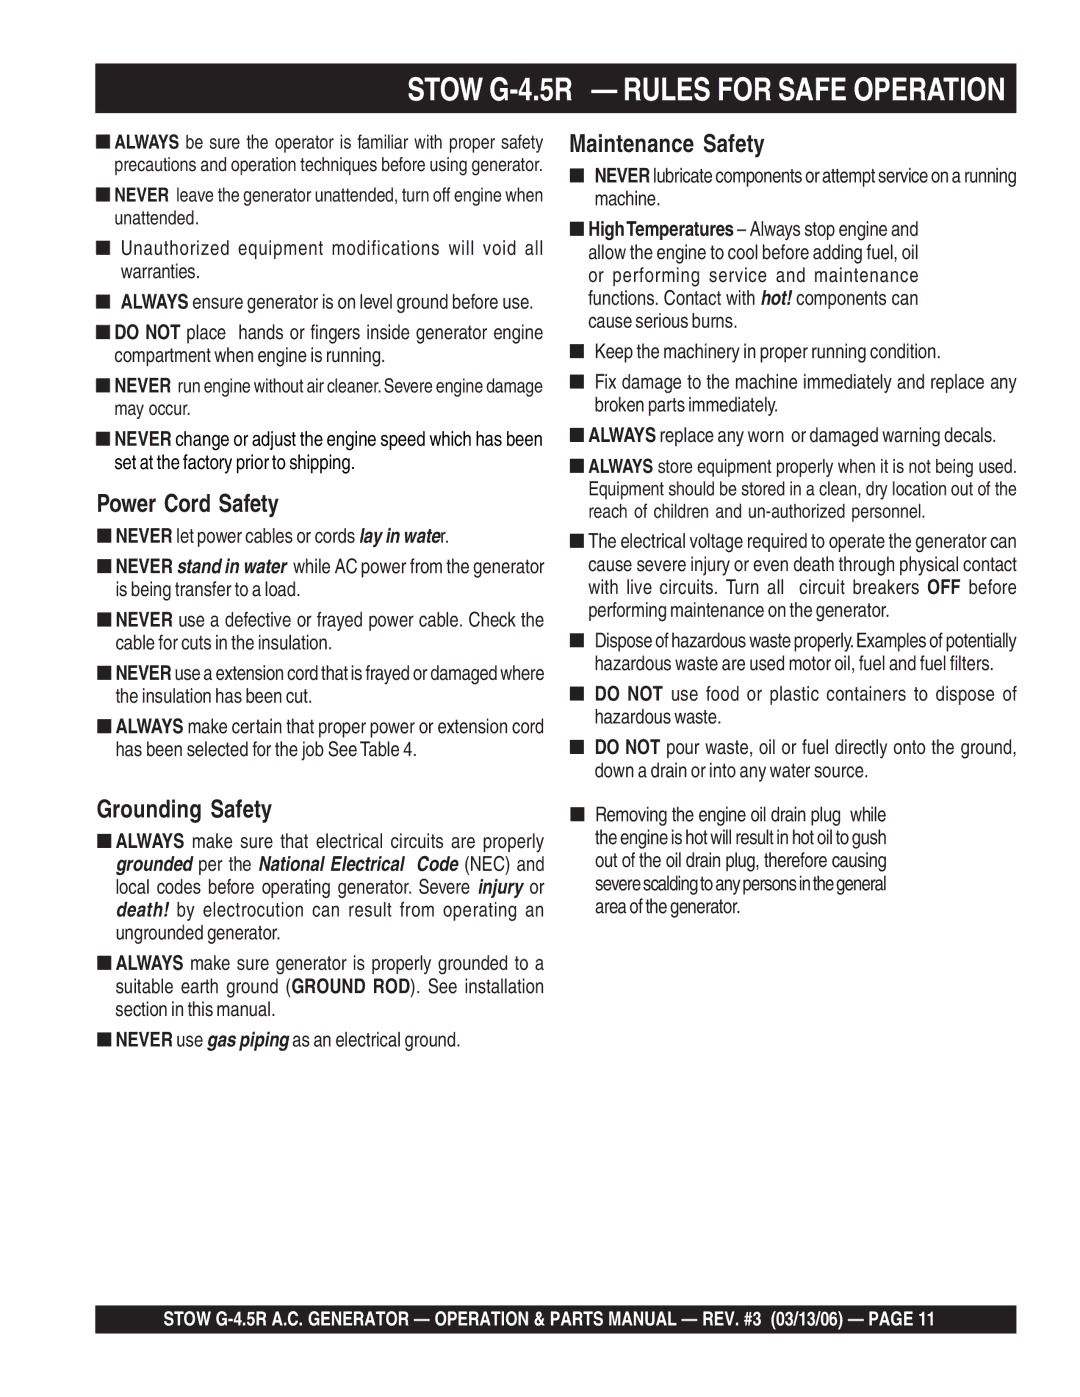 Stow manual Stow G-4.5R Rules for Safe Operation, Power Cord Safety 